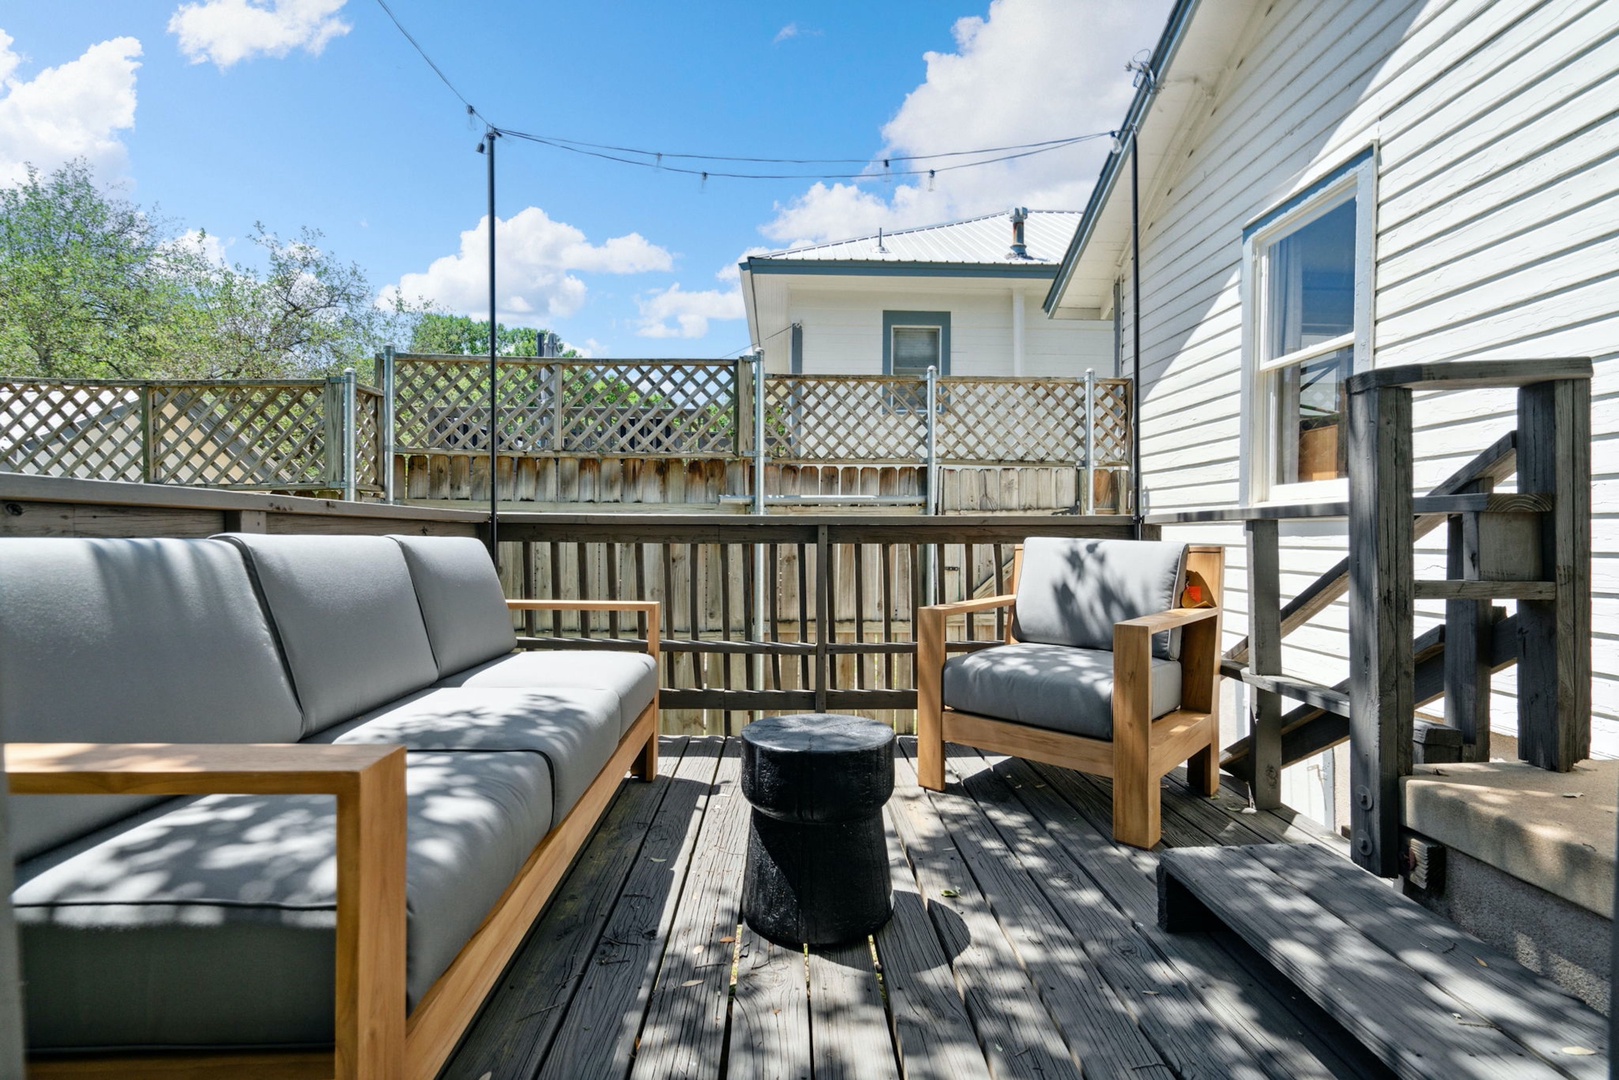 Kick back & relax in the sunshine on the Guest House’s cozy back deck!